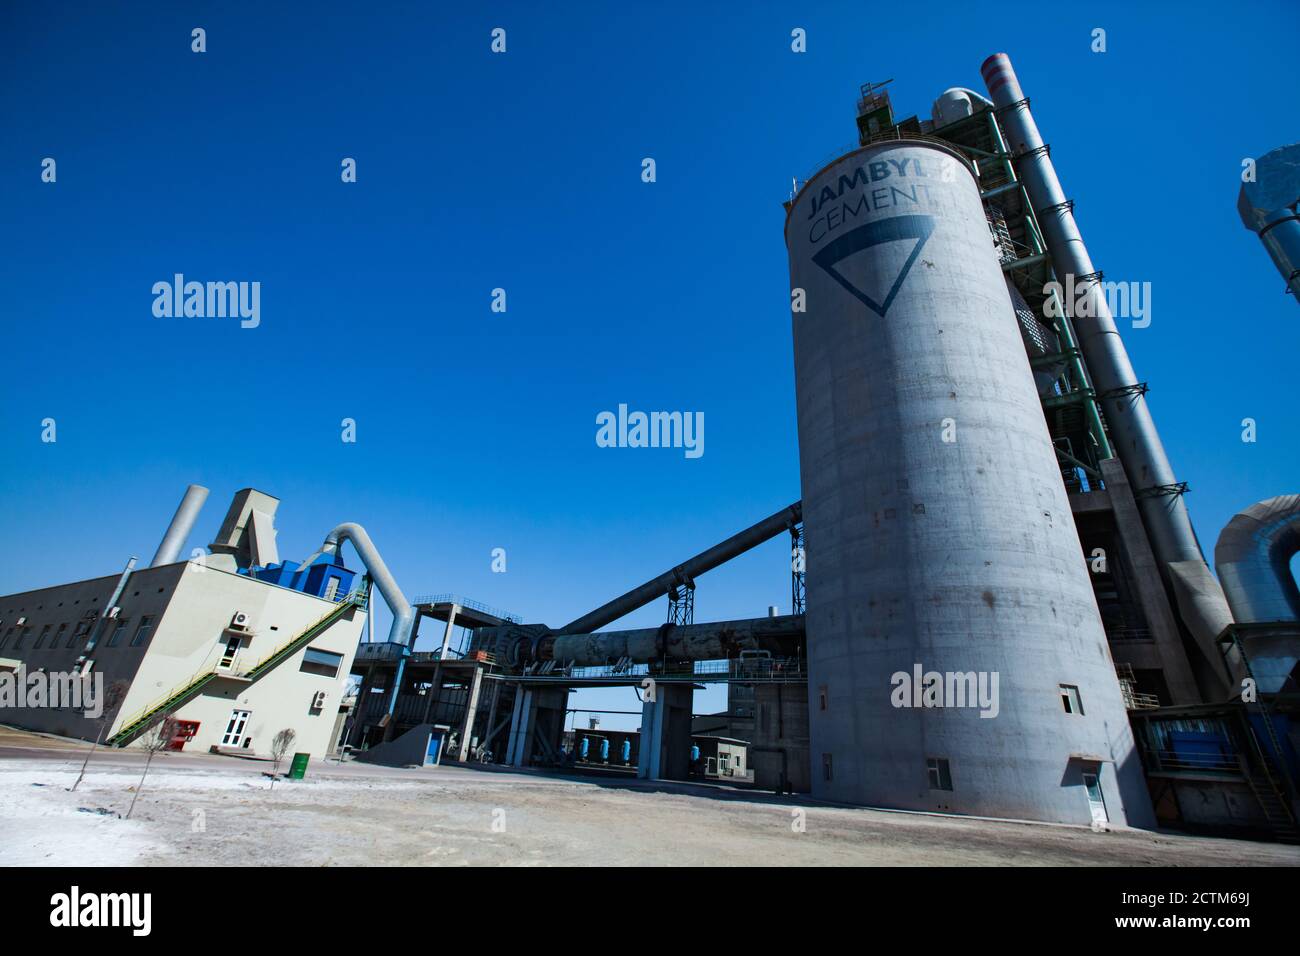 Mynaral/Kazakhstan - April 23 2012: Jambyl Cement plant industrial buildings, rotary clinker kiln and silo. Panorama view with wide-angle lens. Stock Photo